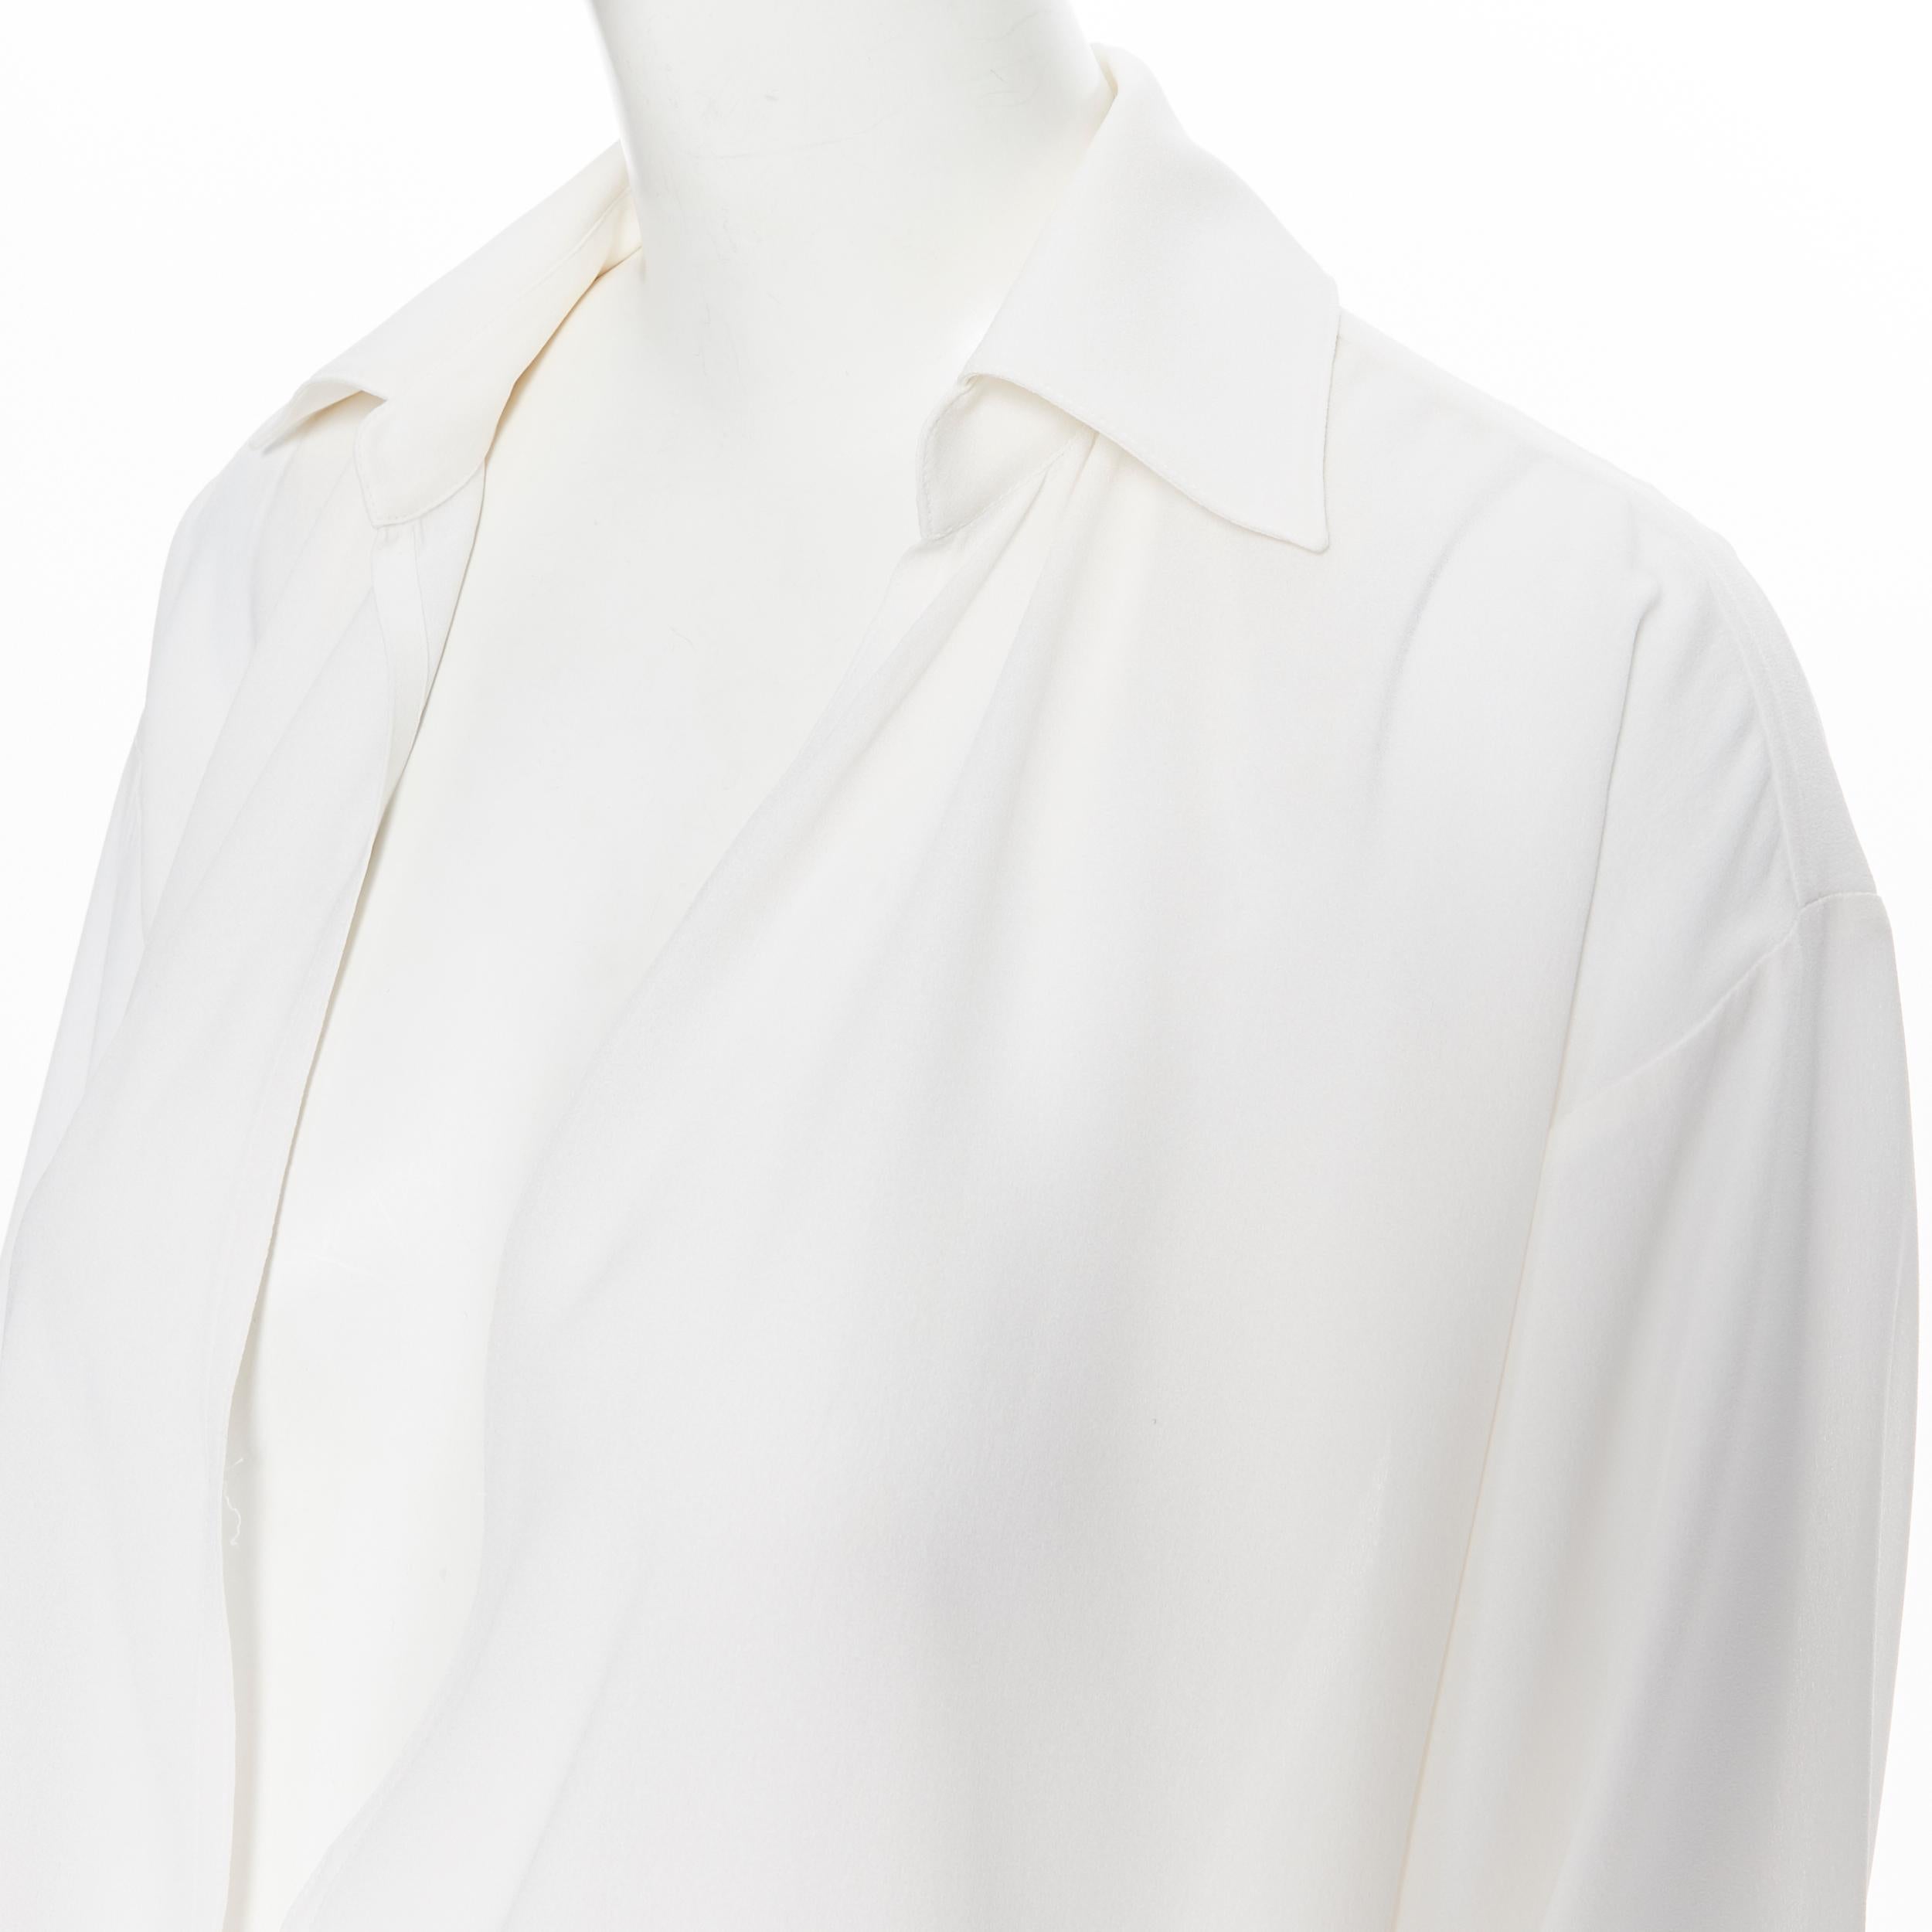 MICHAEL KORS COLLECTION 100% silk  white foldover open front draped sihrt XS
Brand: Michael Kors
Designer: Michael Kors
Model Name / Style: Silk blouse
Material: Silk
Color: White
Pattern: Solid
Extra Detail: 100% silk. Spread collar. Draped